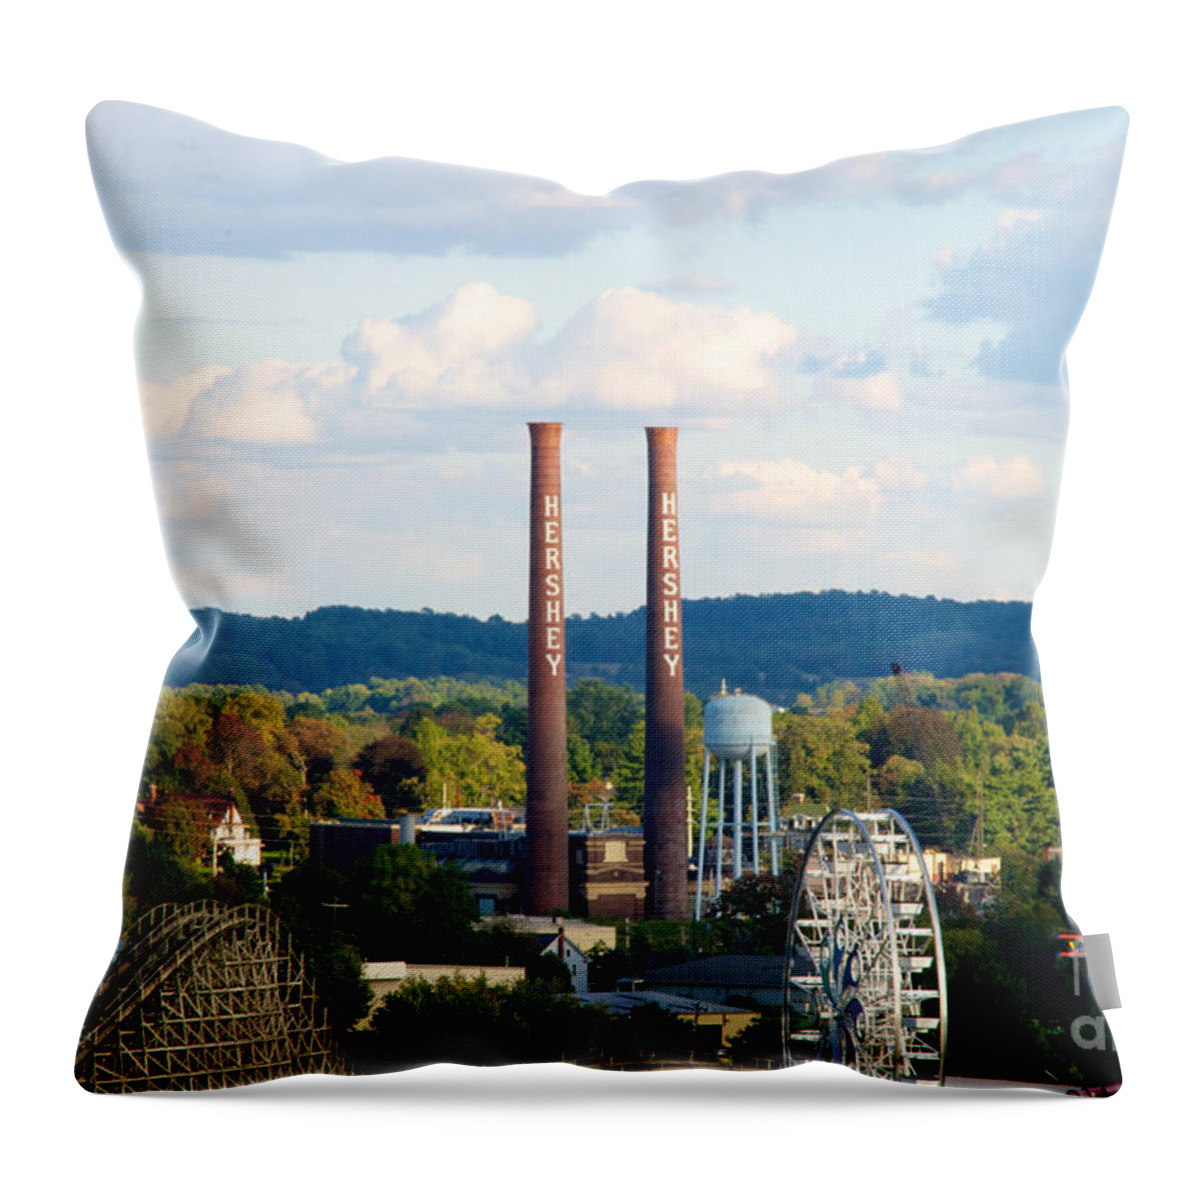 Chimney Throw Pillow featuring the photograph The Smoke Stacks Stand Resolute by Mark Dodd